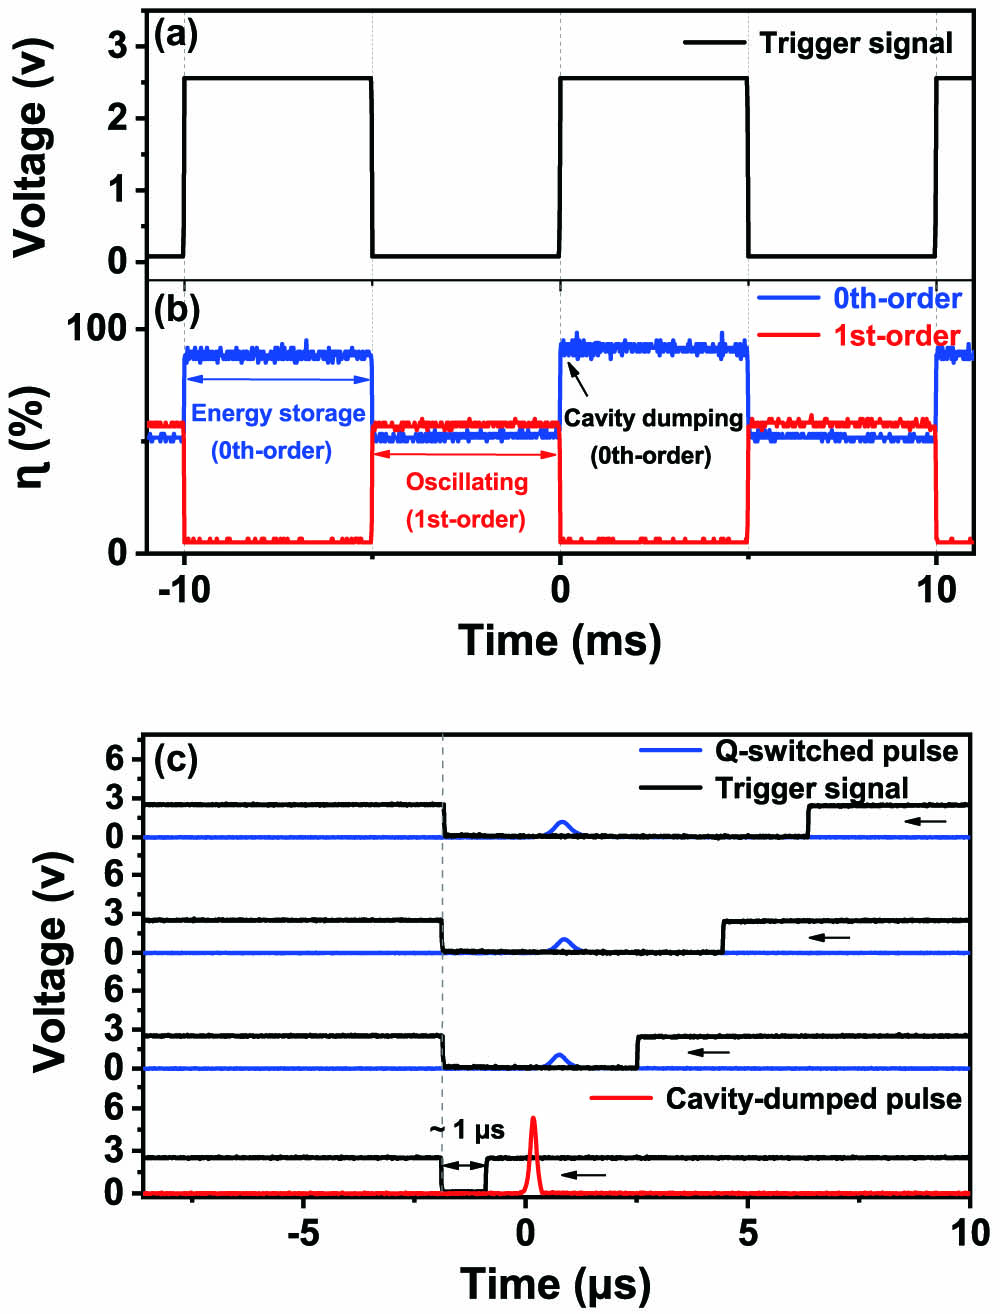 (a) Periodical electric signal. (b) Formation of cavity-dumped green laser pulses and diffraction efficiency measurement at 543 nm of visible wavelength spatial modulator. (c) Process of generating cavity-dumping pulses by controlling the duty cycle of trigger signals.